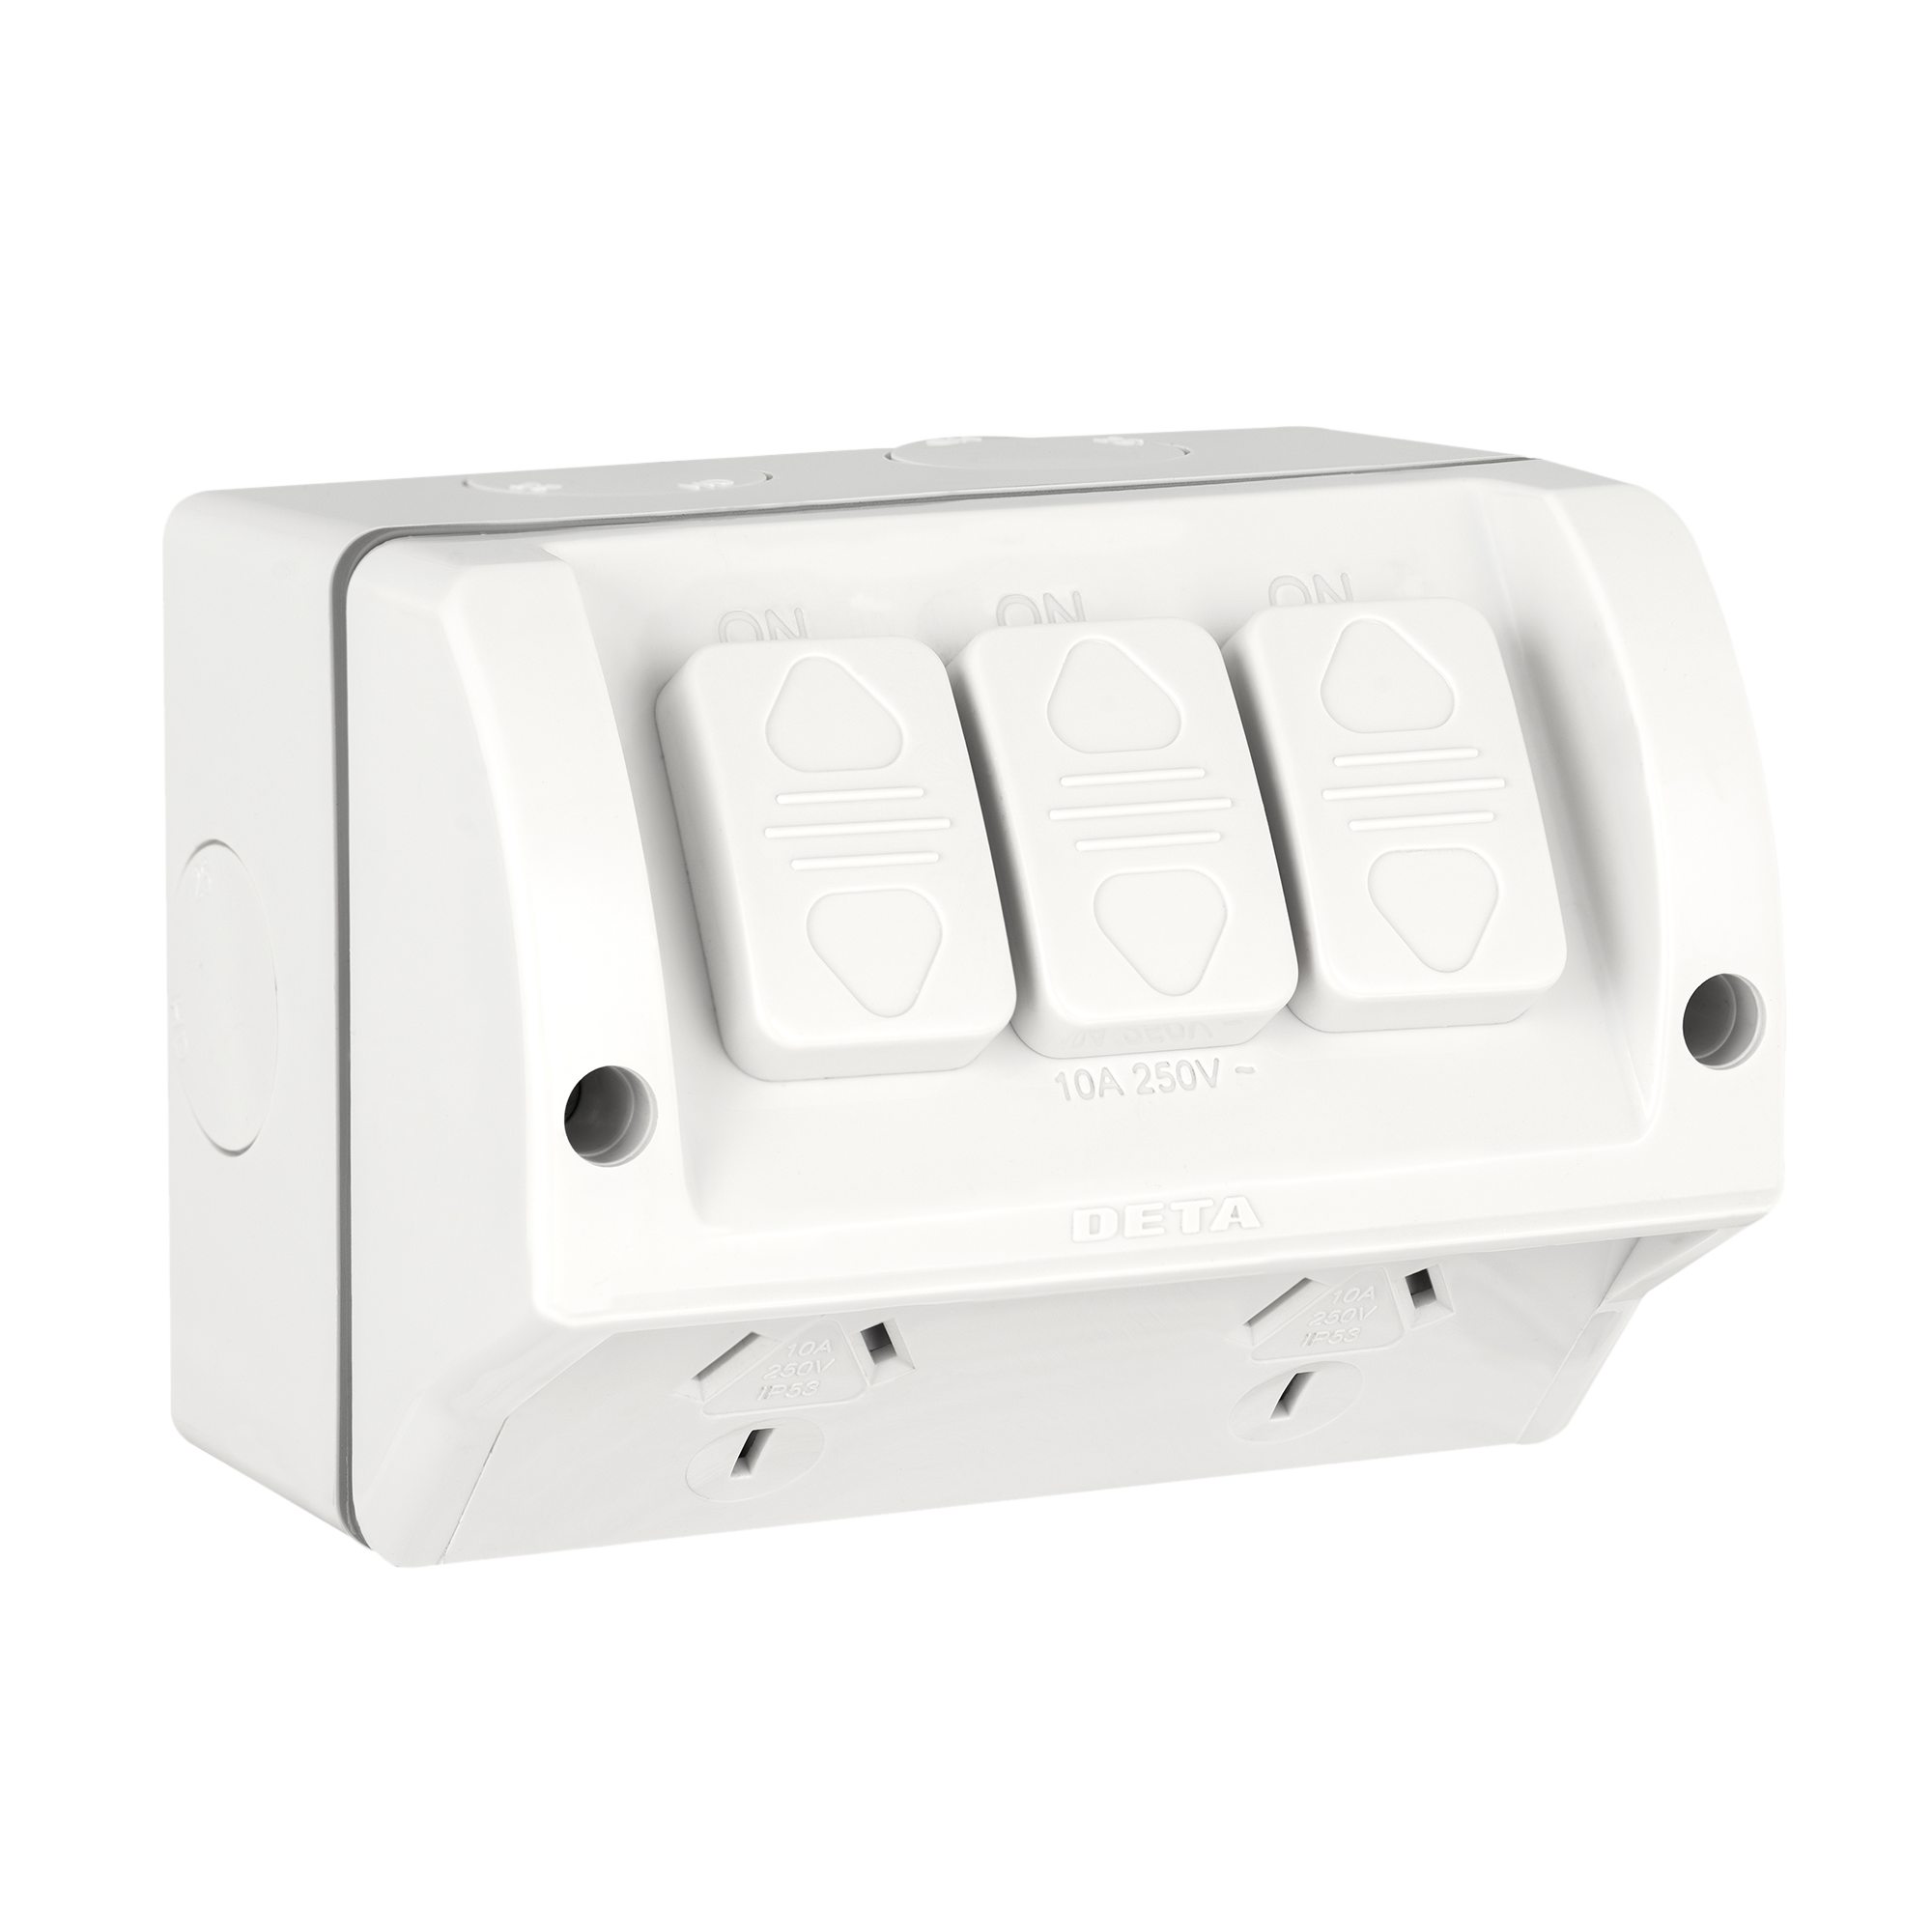  Double outlet outdoor + switch